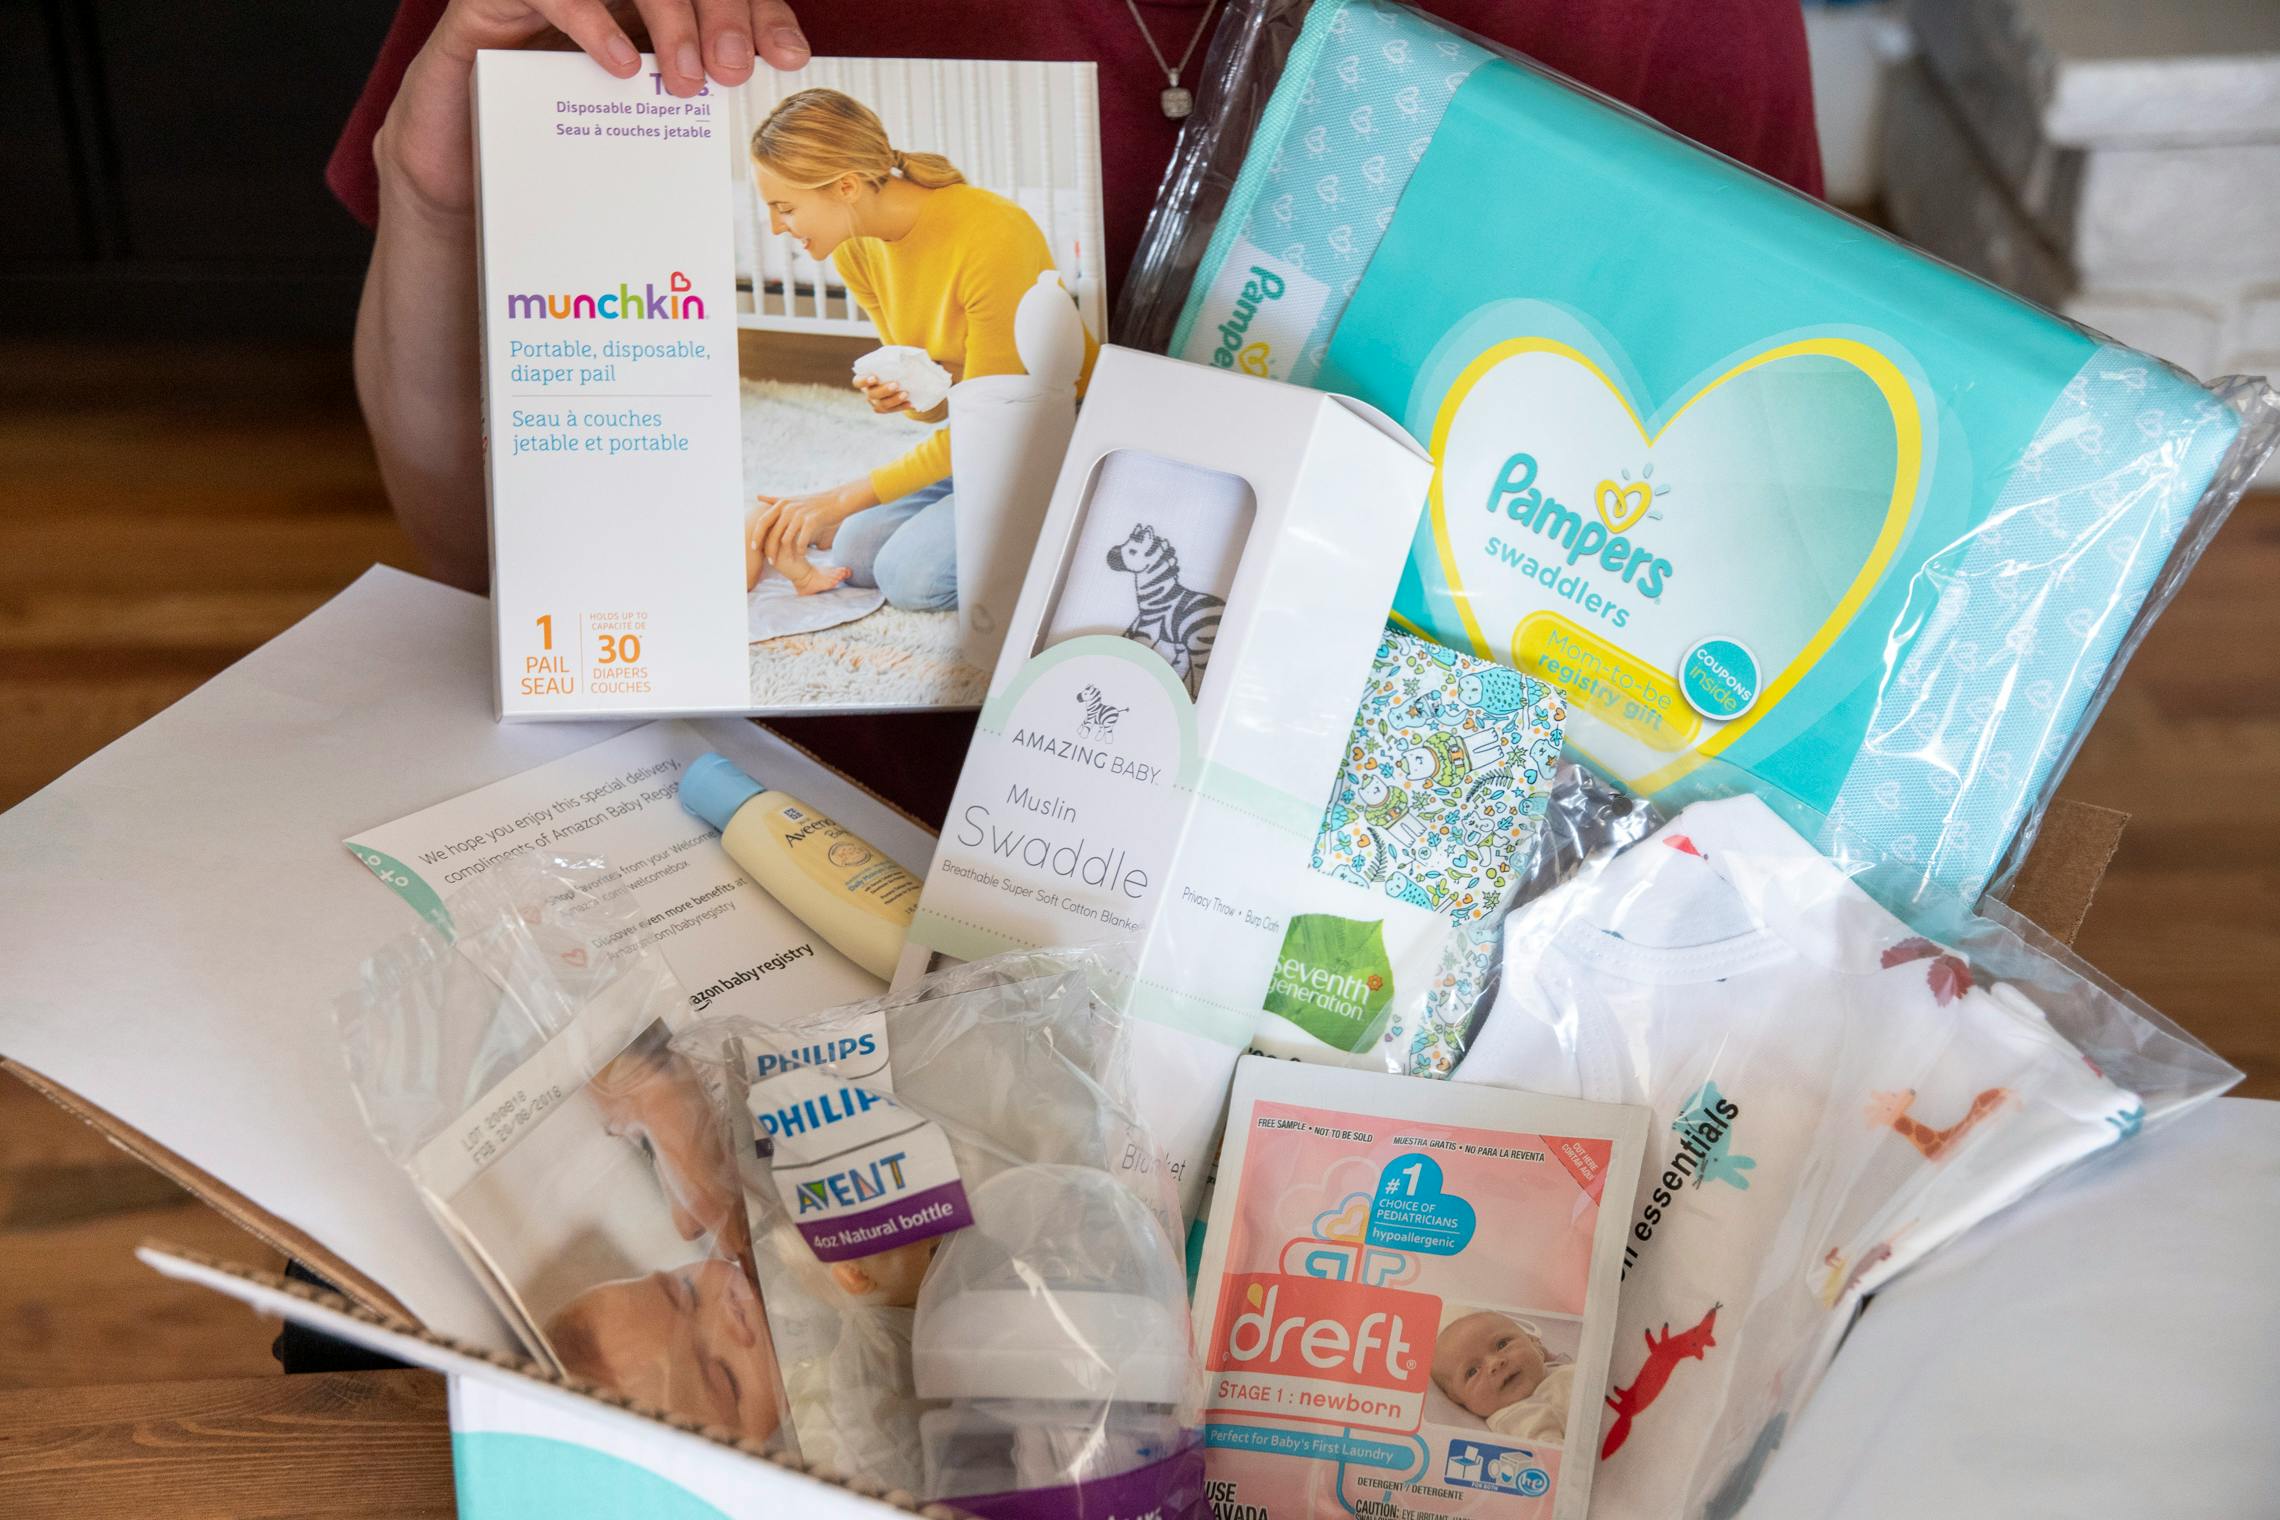 23 Places with Free Baby Stuff for New 